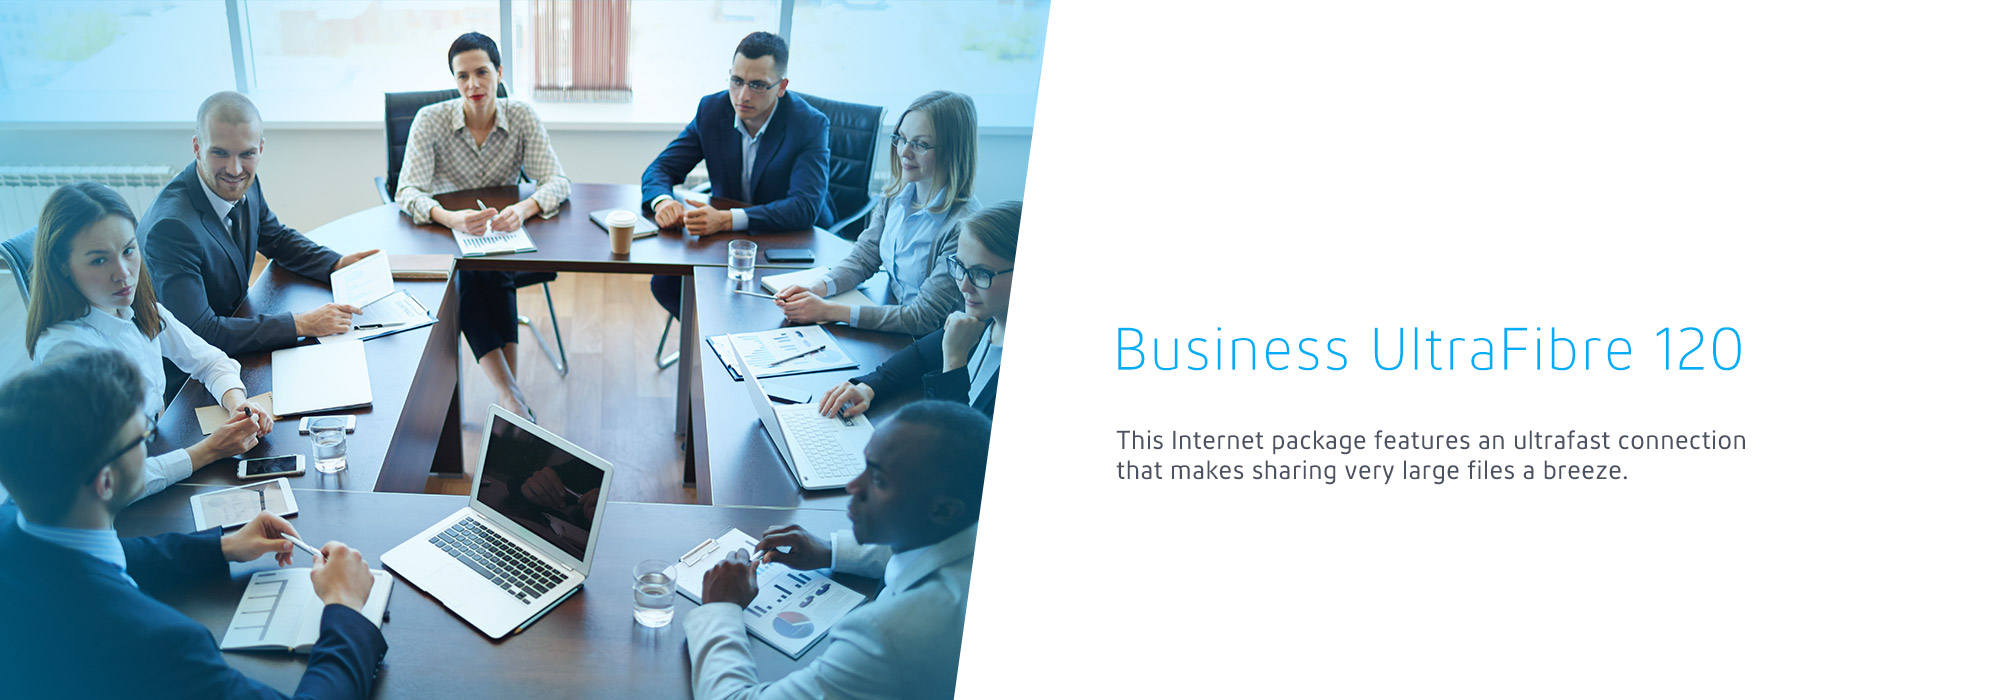 Business UltraFibre 120 This Internet package features an ultrafast connection that makes sharing very large files a breeze.